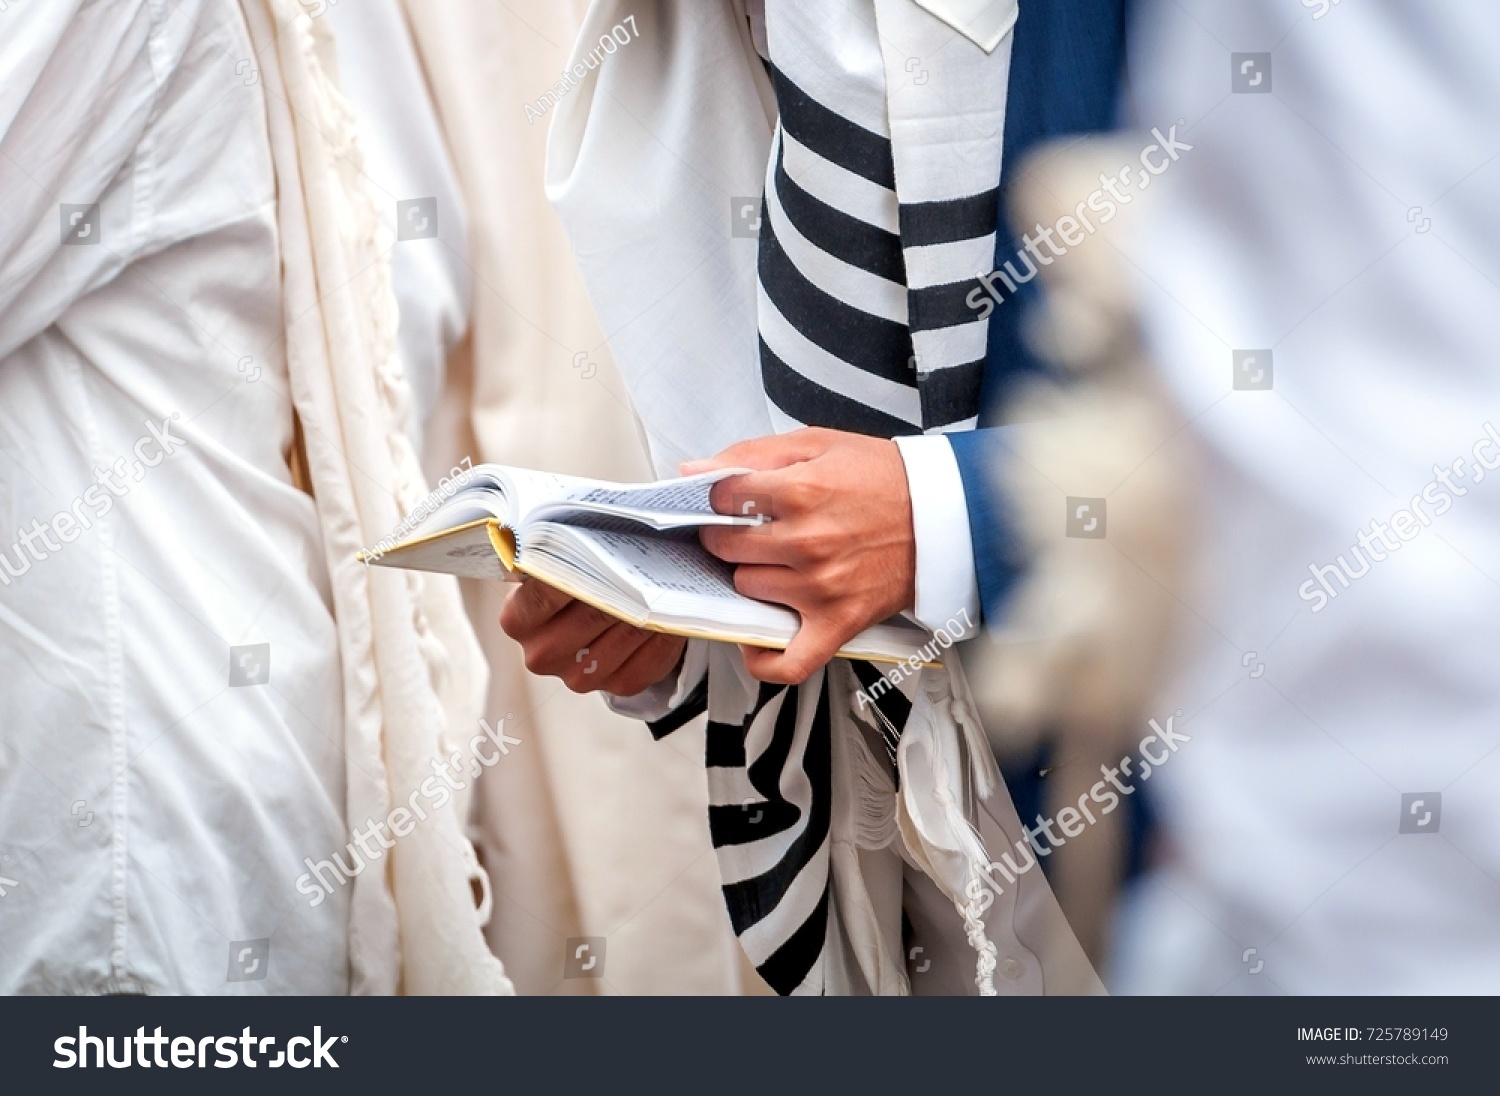 Hands and prayer book close-up. Orthodox hassidic Jews pray in a holiday robe and tallith #725789149